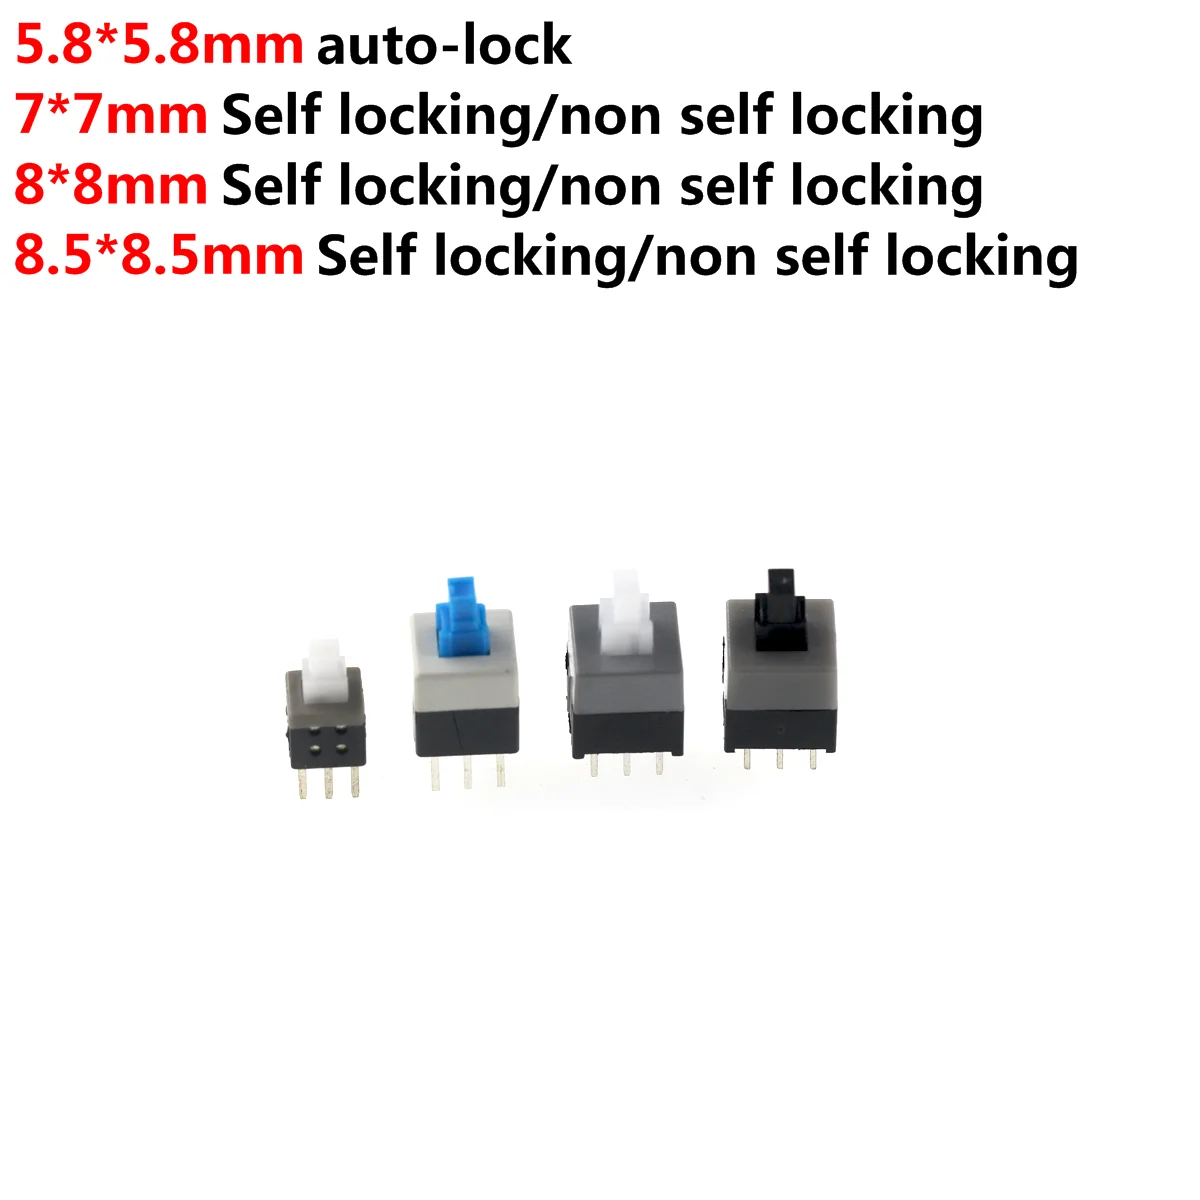 100PCS/LOT 5.8x5.8 7x7 8x8 8.5x8.5mm Self Locking / UNlock Push Tactile Power Micro Switch 6 Pin Button Switches 4 6 3 2 2 5 micro switch tactile push button for buick for chevroelt cruze byd car remote control key button switches